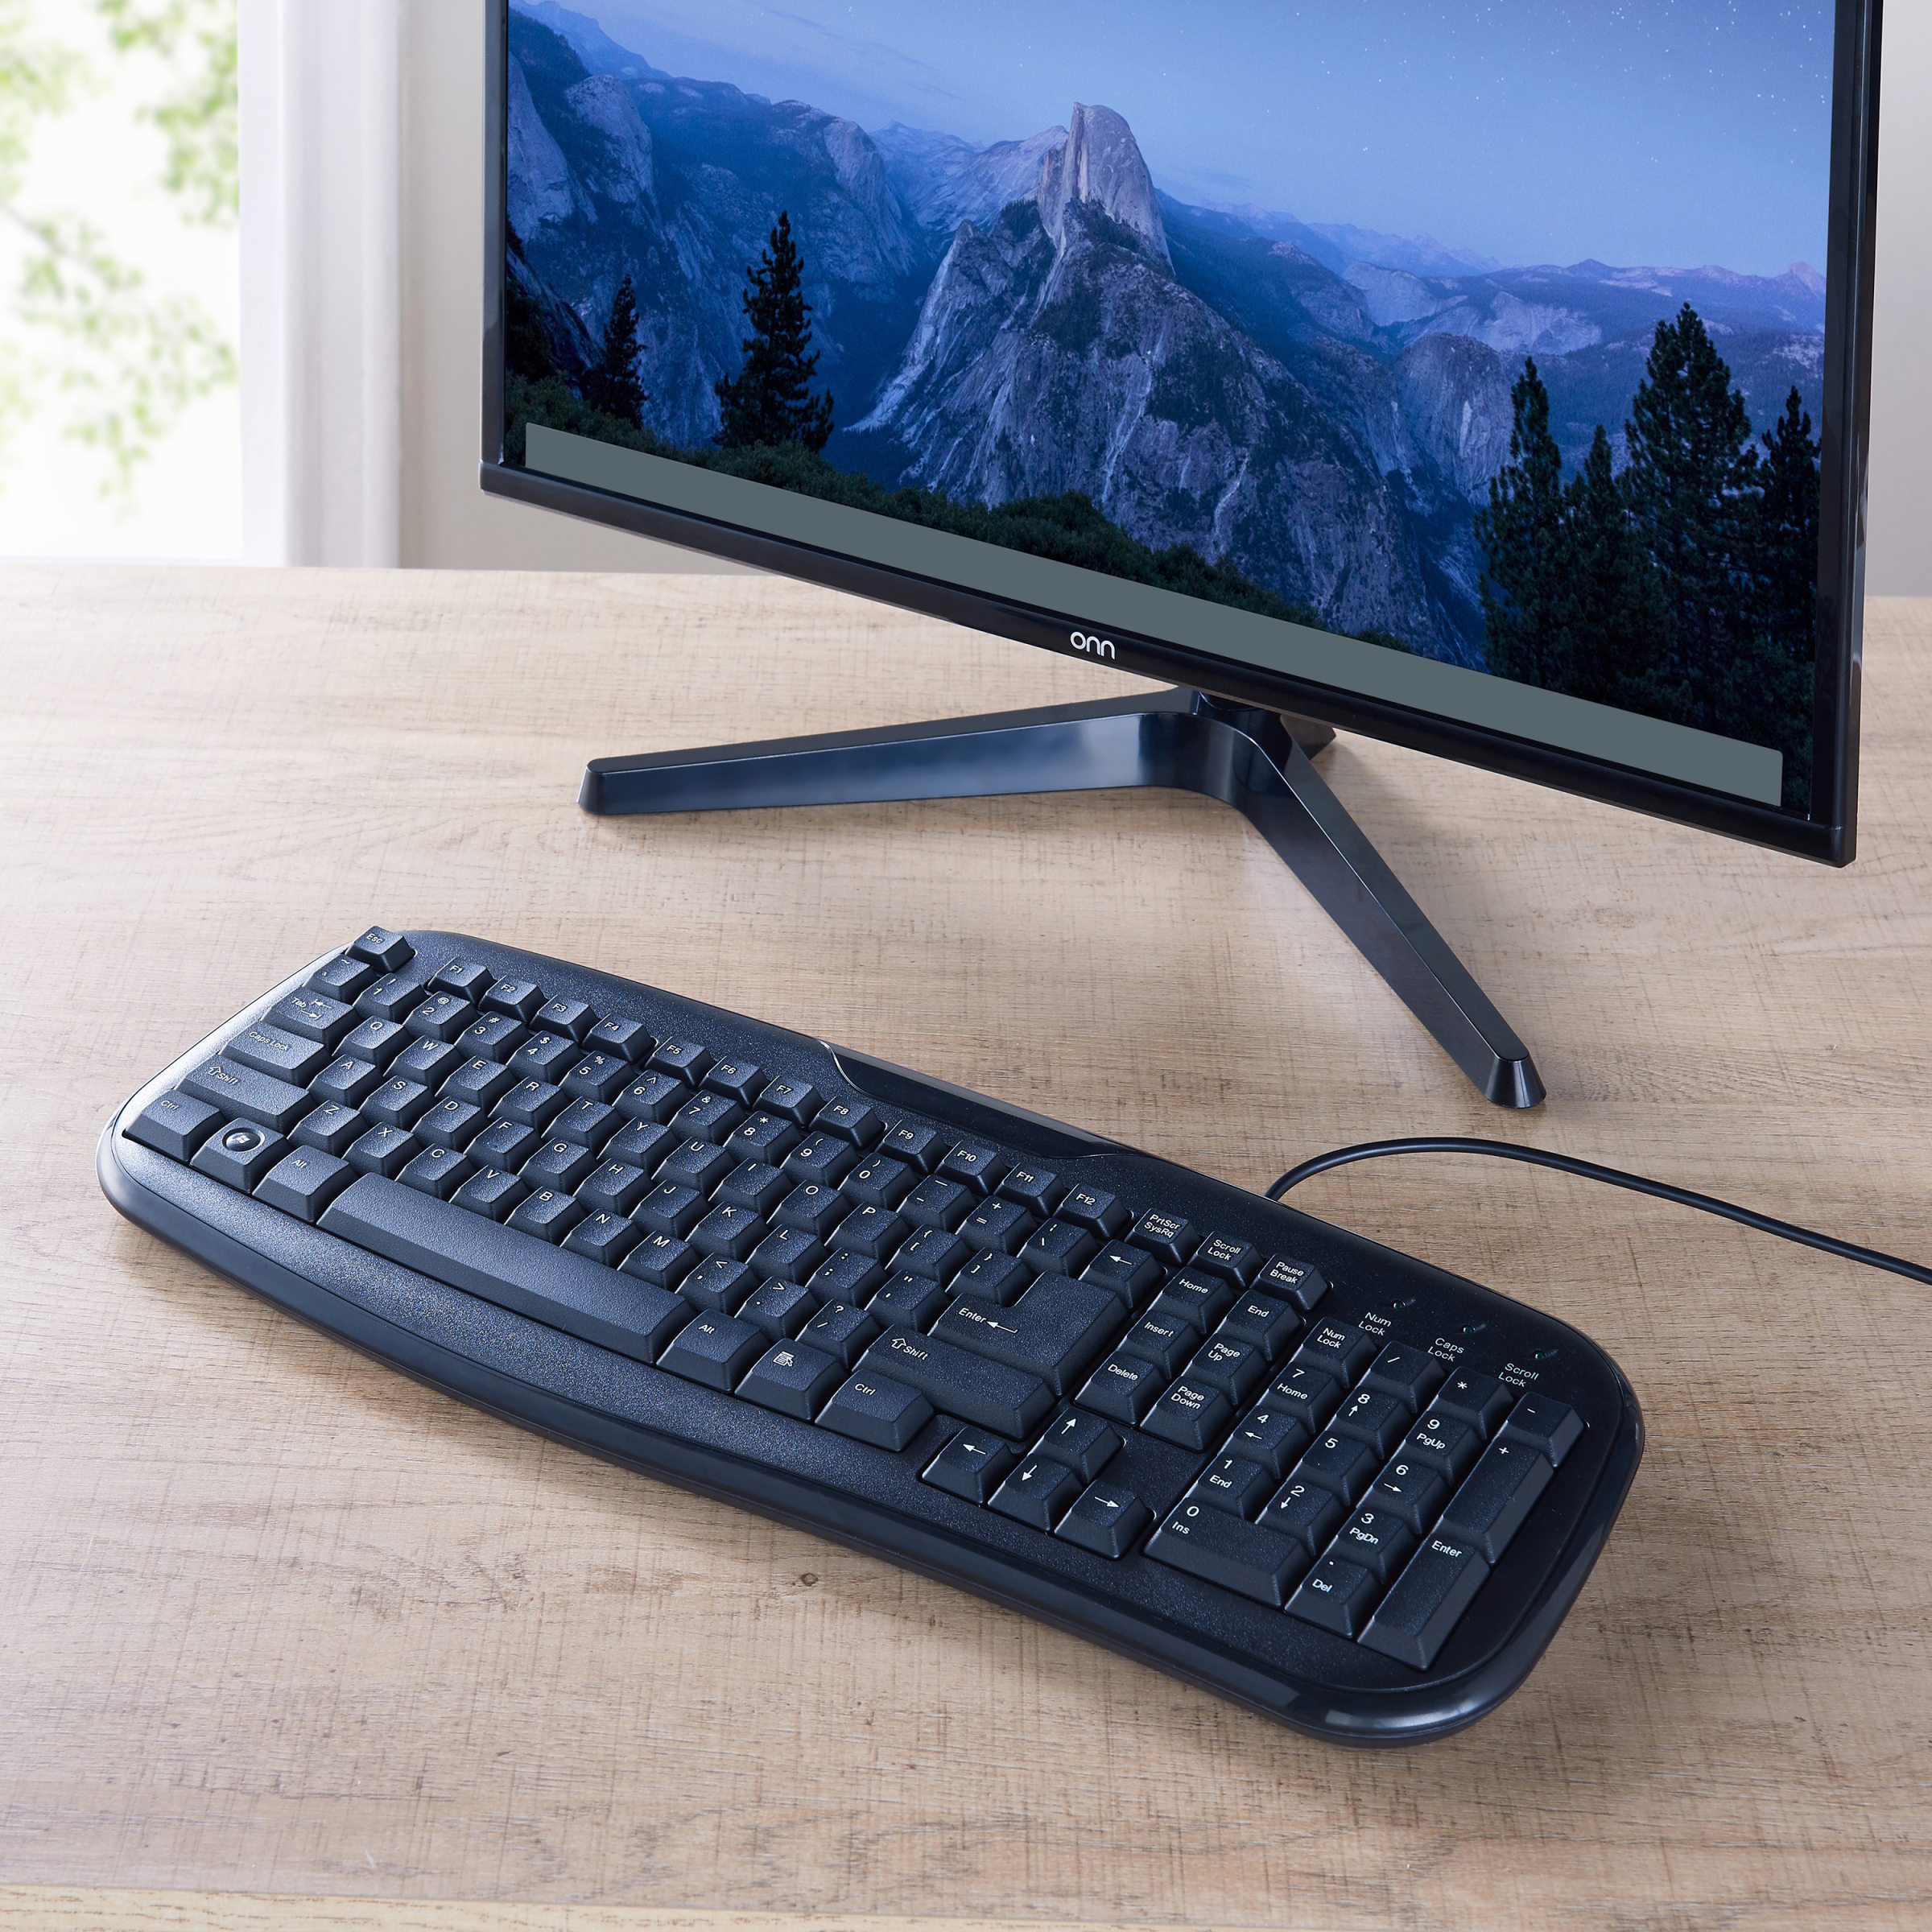 Onn Usb Connected Soft-Touch Wired Keyboard, Black - image 2 of 4